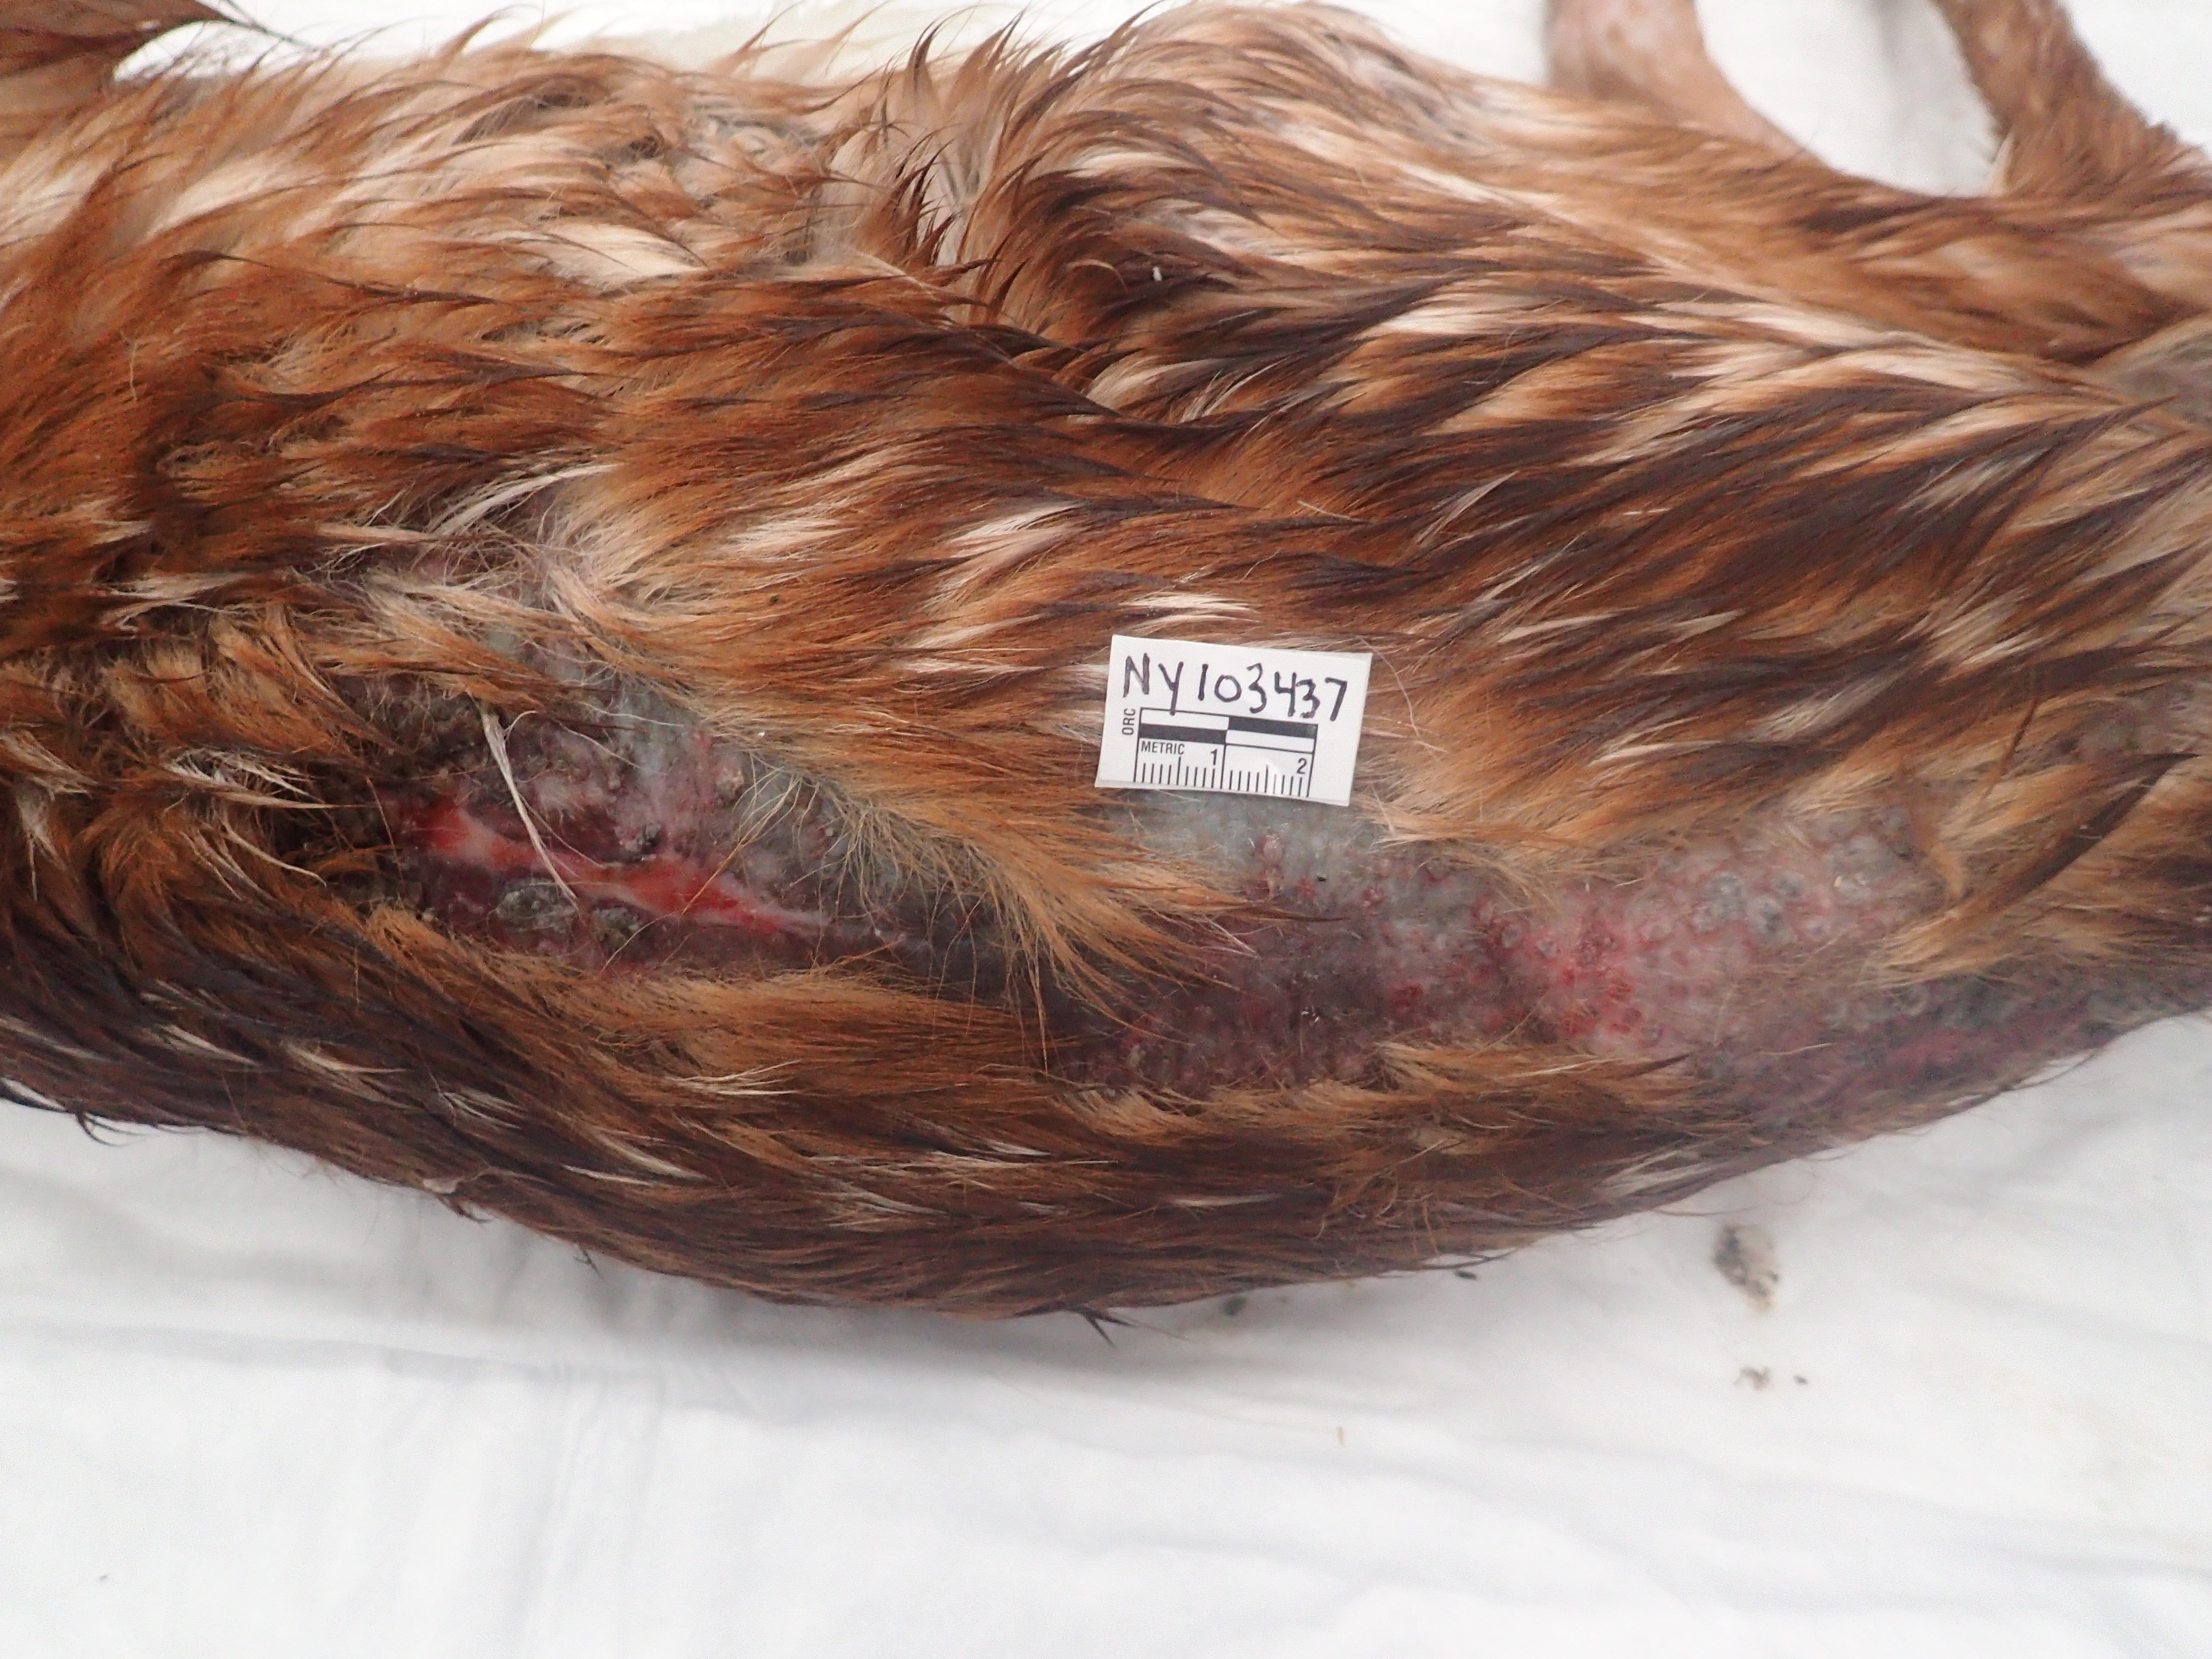 male white-tailed fawn with lesions spread across its back from dermatophilosis infection